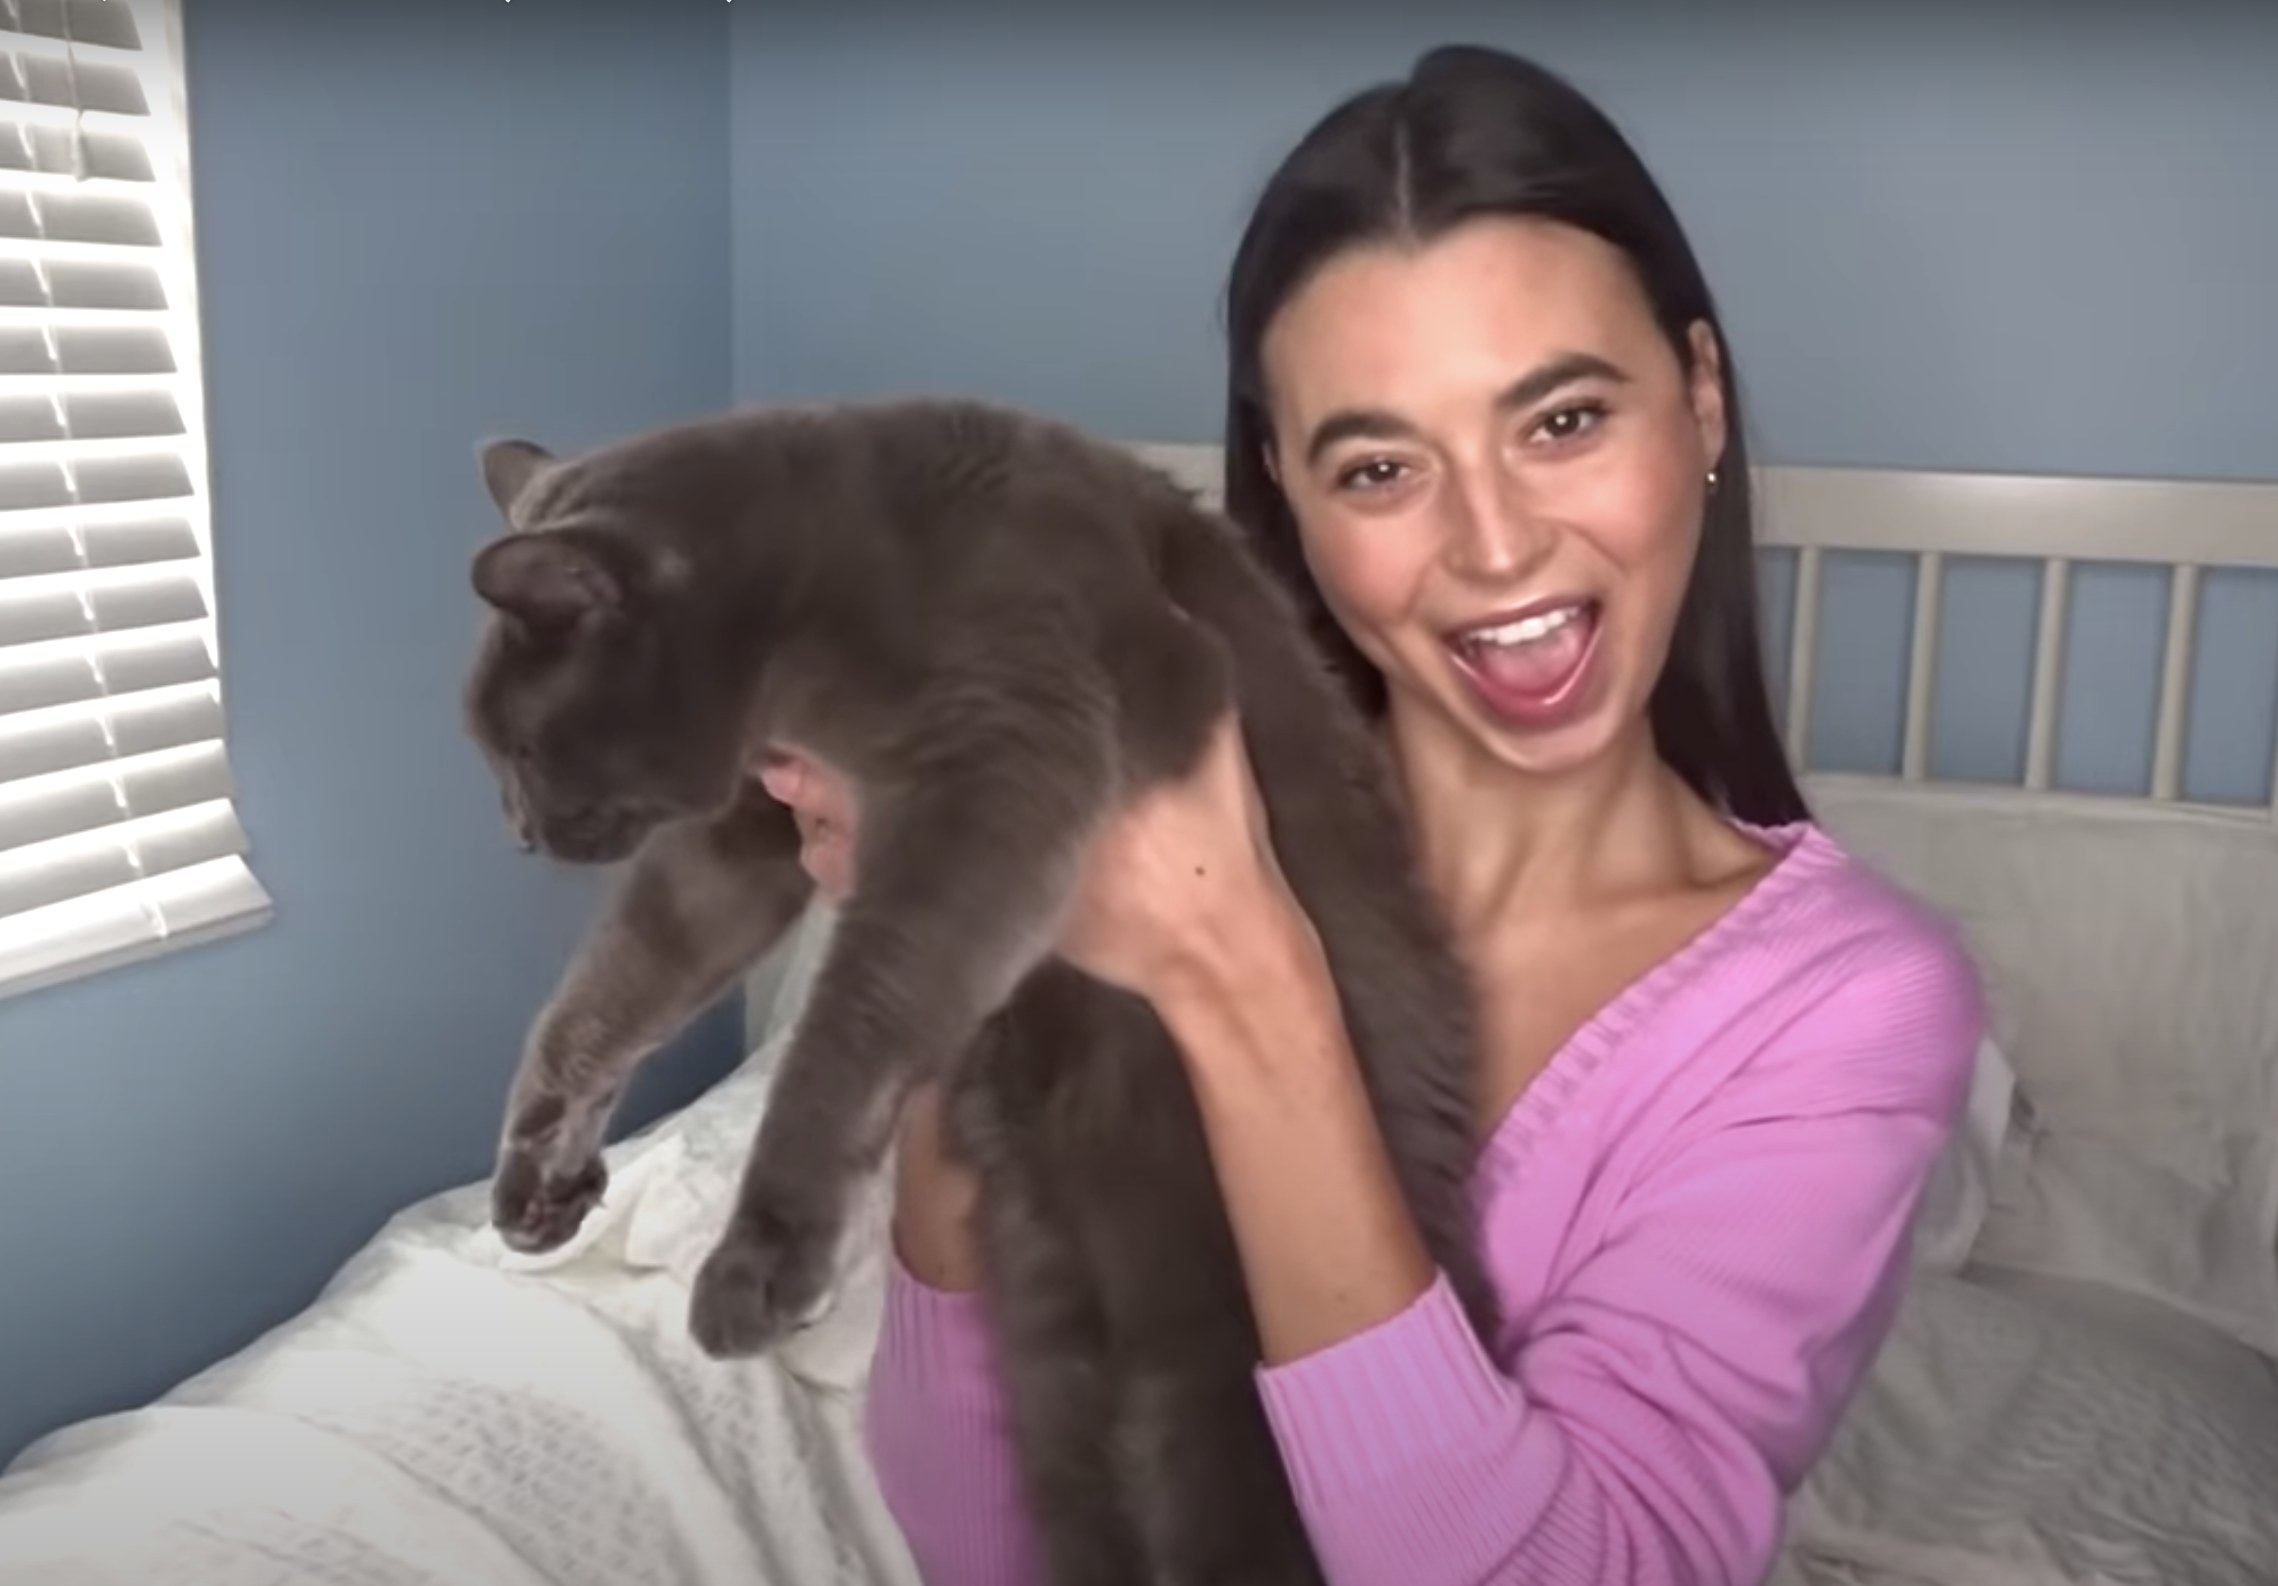 Reina smiles and holds up her grey cat